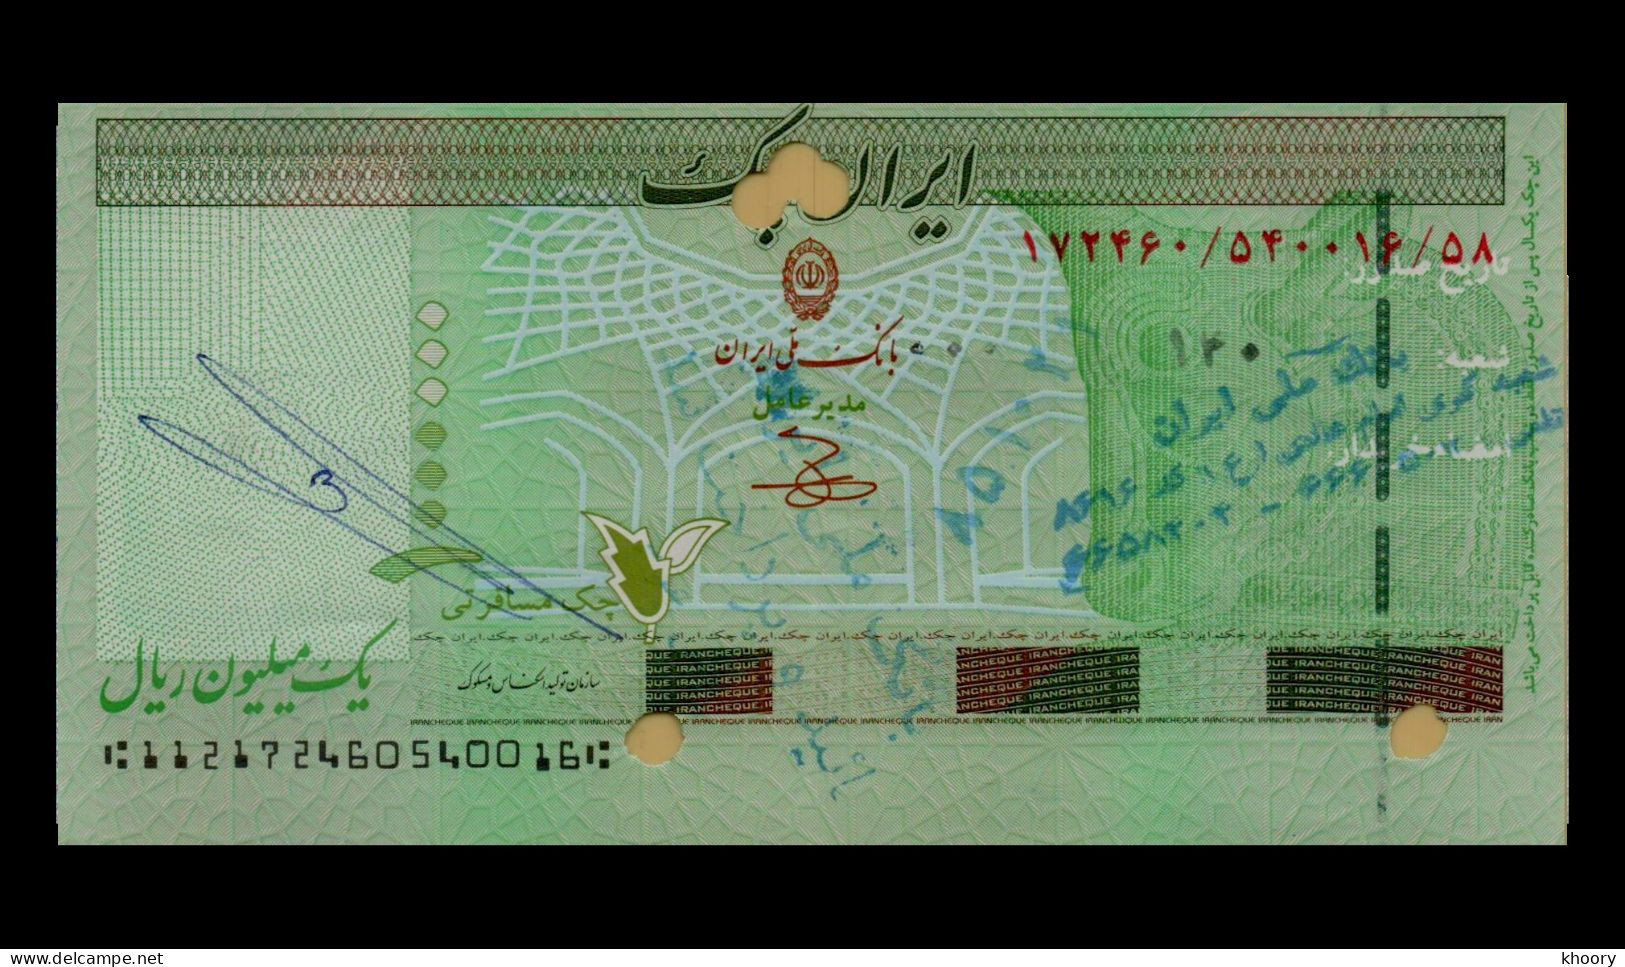 Iran Cheque (Melli Bank) 1.000.000 2000 3rd Issue (UNC-) P-NEW (Sign 2) [Light Front Fold] - Iran